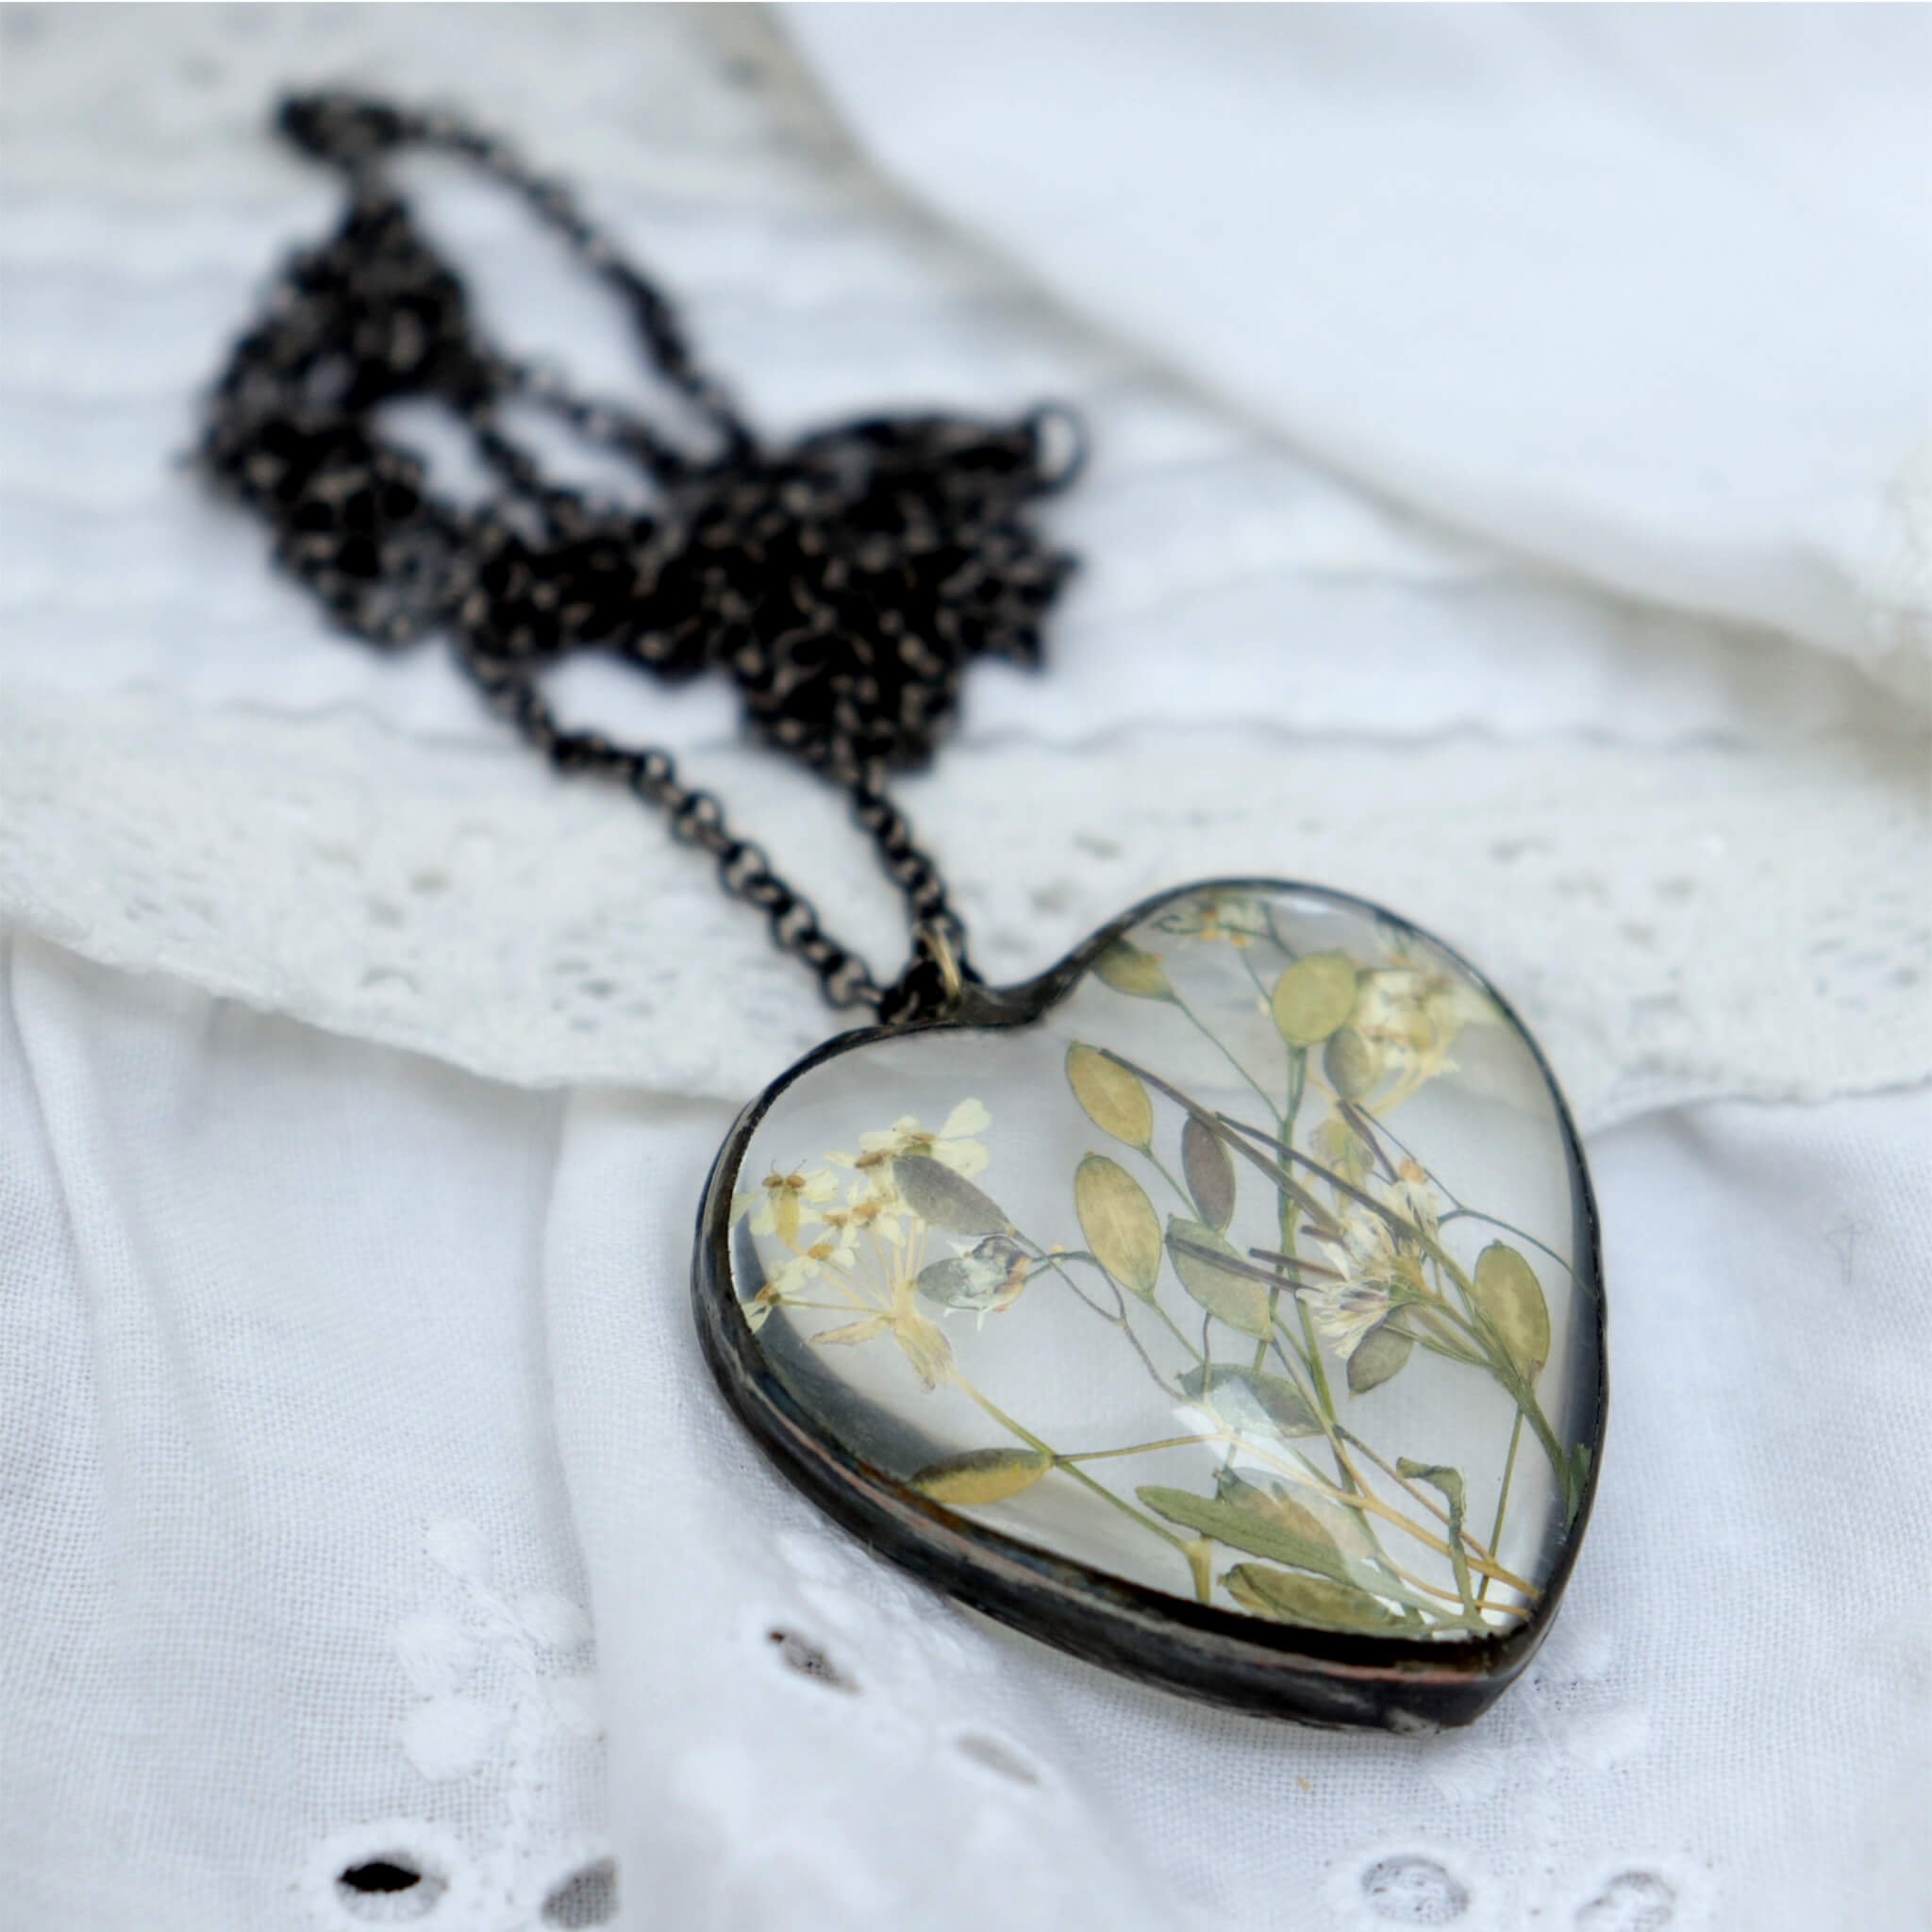 heart shaped glass necklace with some plants inside it lying on a white lacy fabric